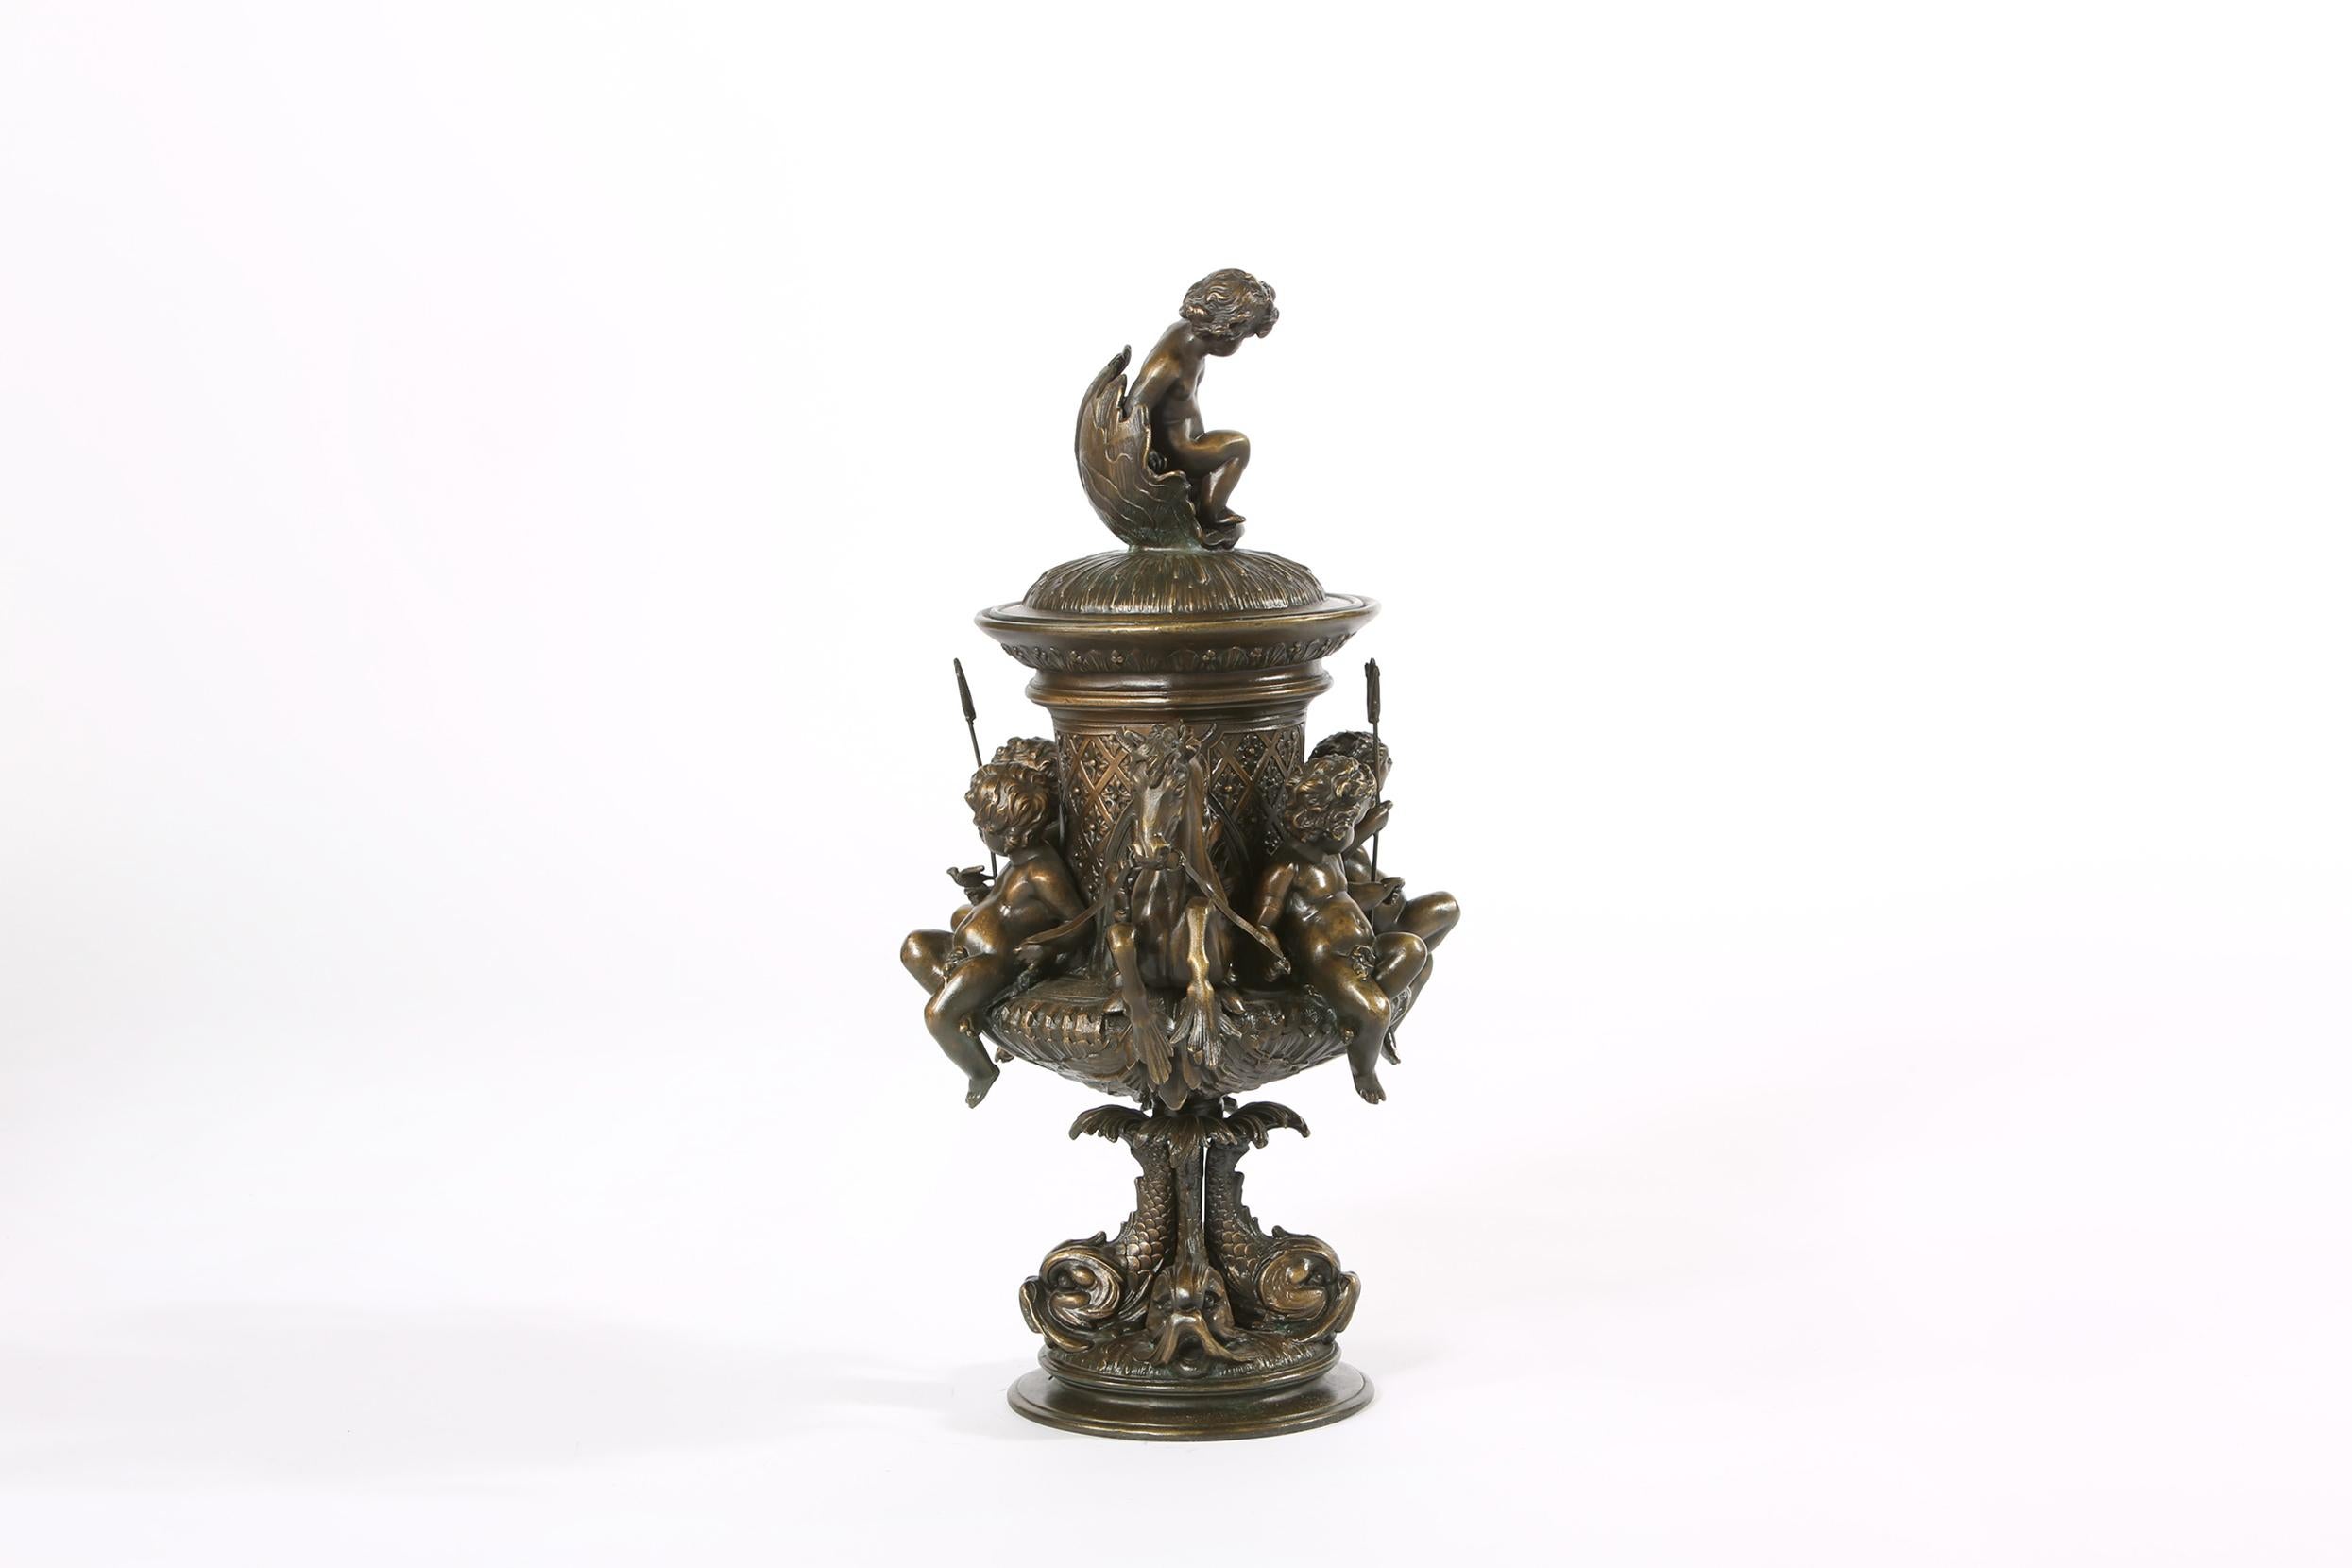 Early 20th century tall bronze non removable covered urn / centerpiece. The centerpiece is in great condition. It measures about 21 inches high x 14 inches wide.